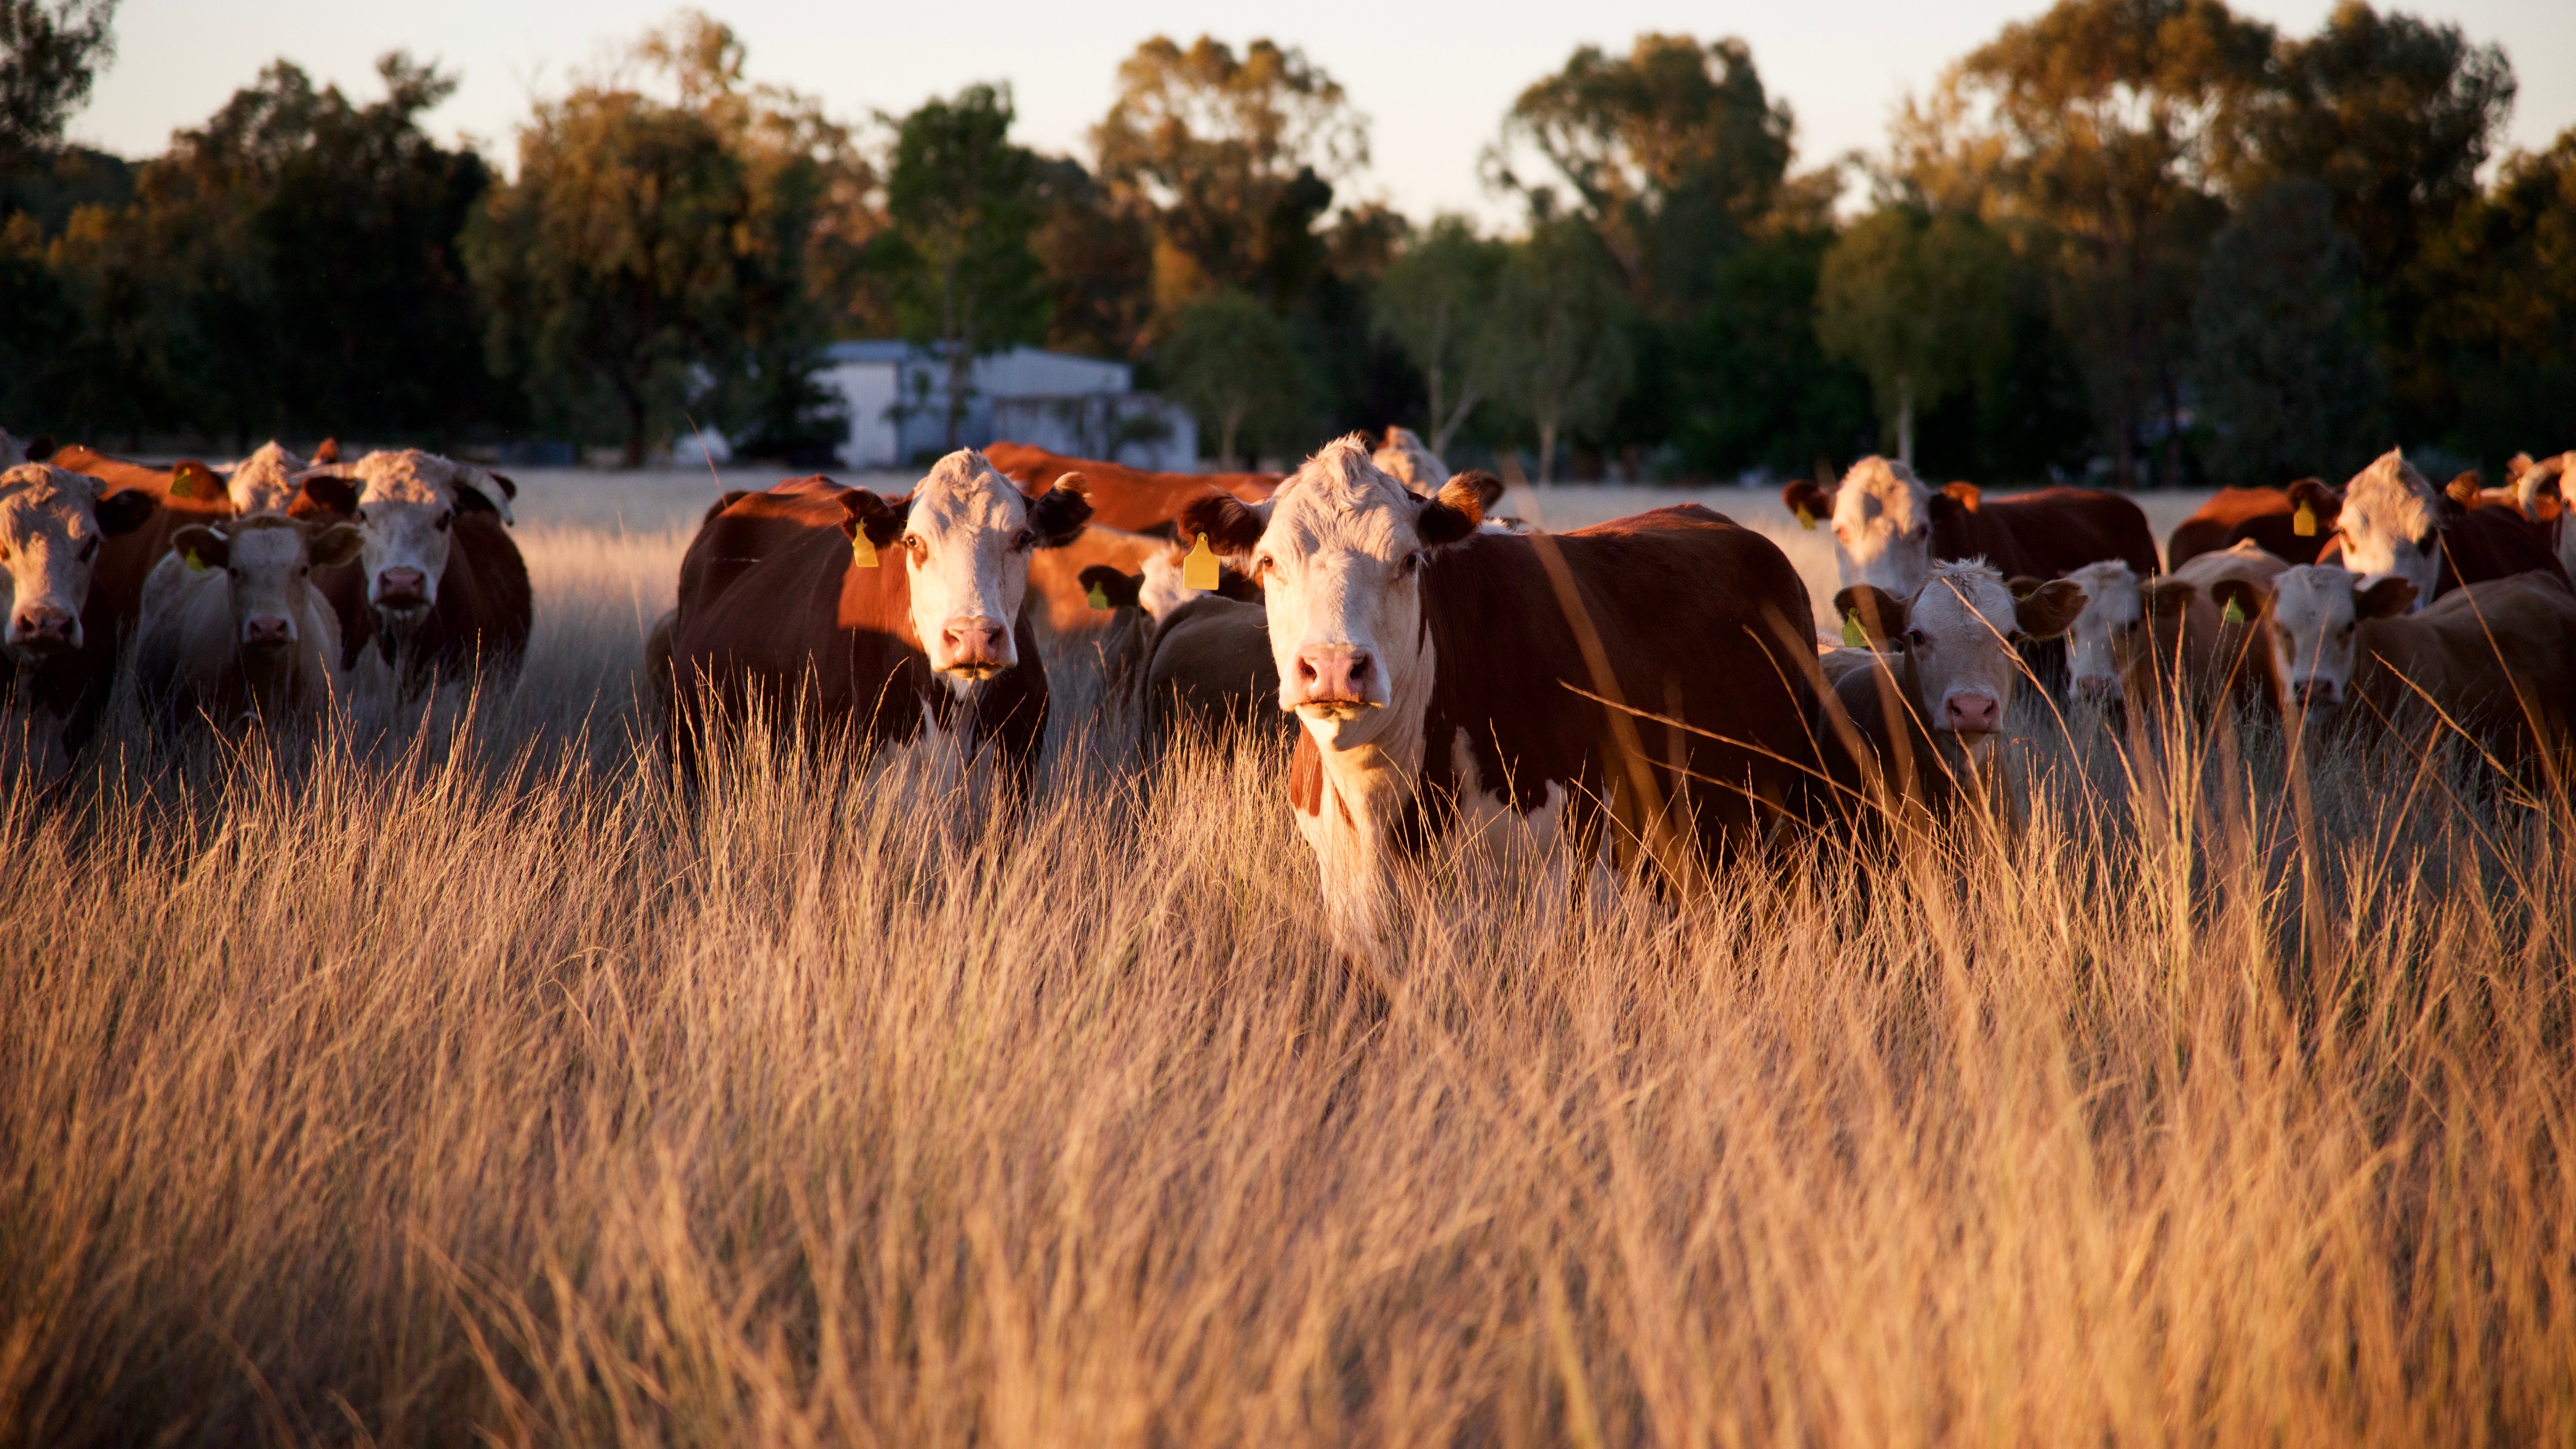 Australian scientists join hundreds globally in support of meat and livestock  production